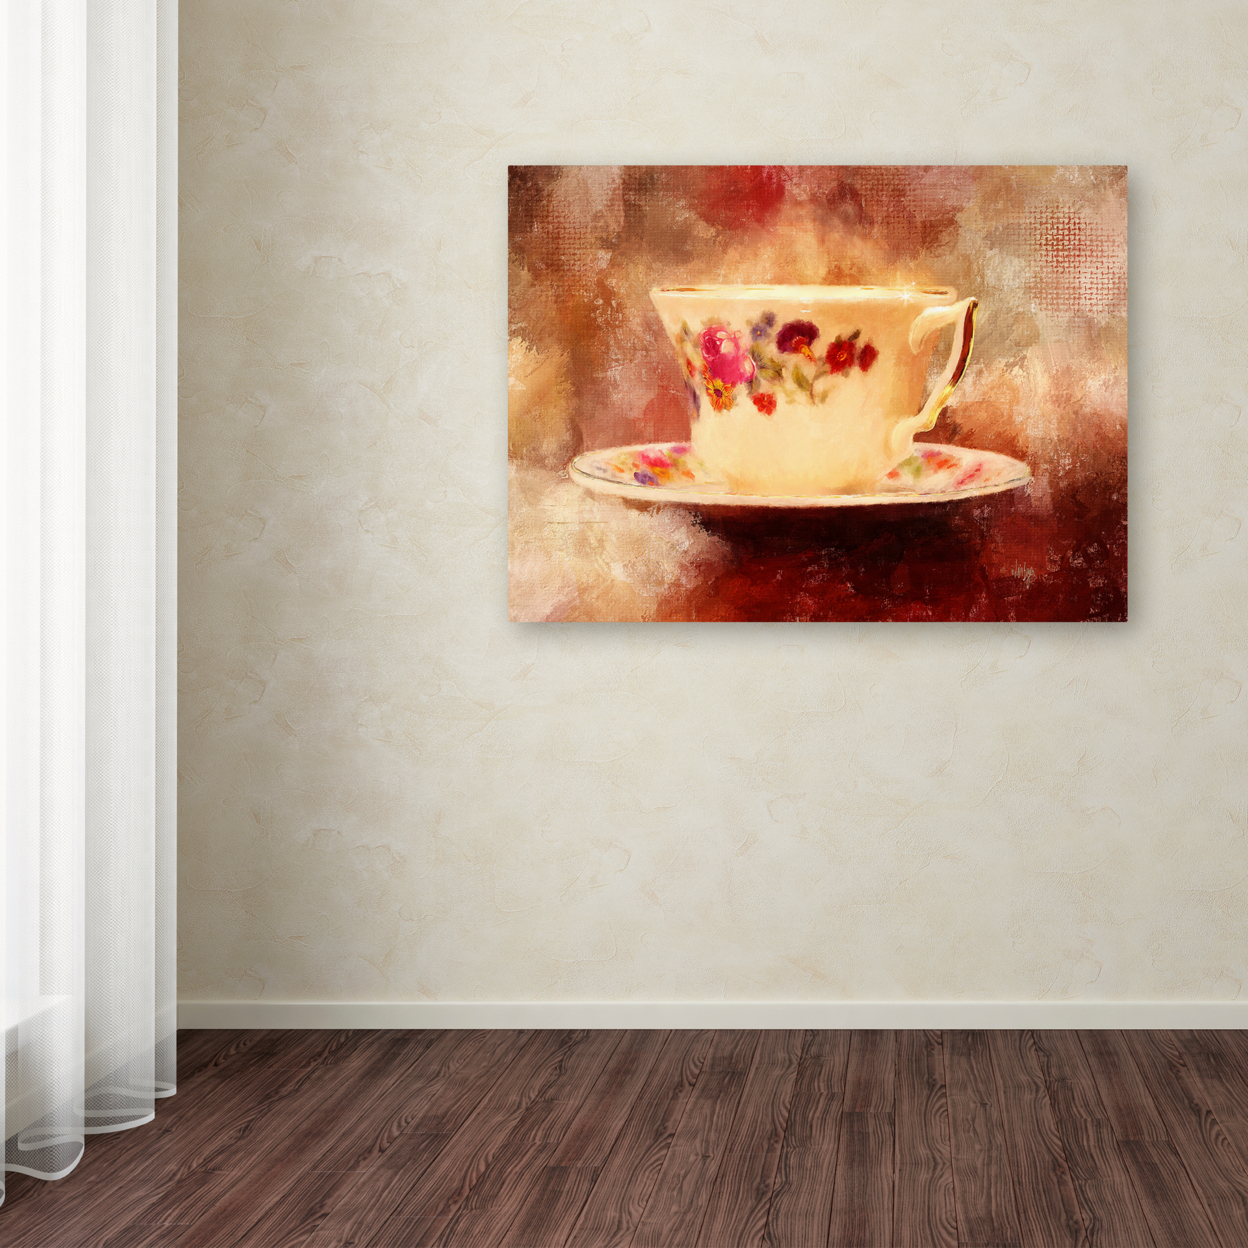 Lois Bryan 'Time For Tea' Canvas Wall Art 35 X 47 Inches